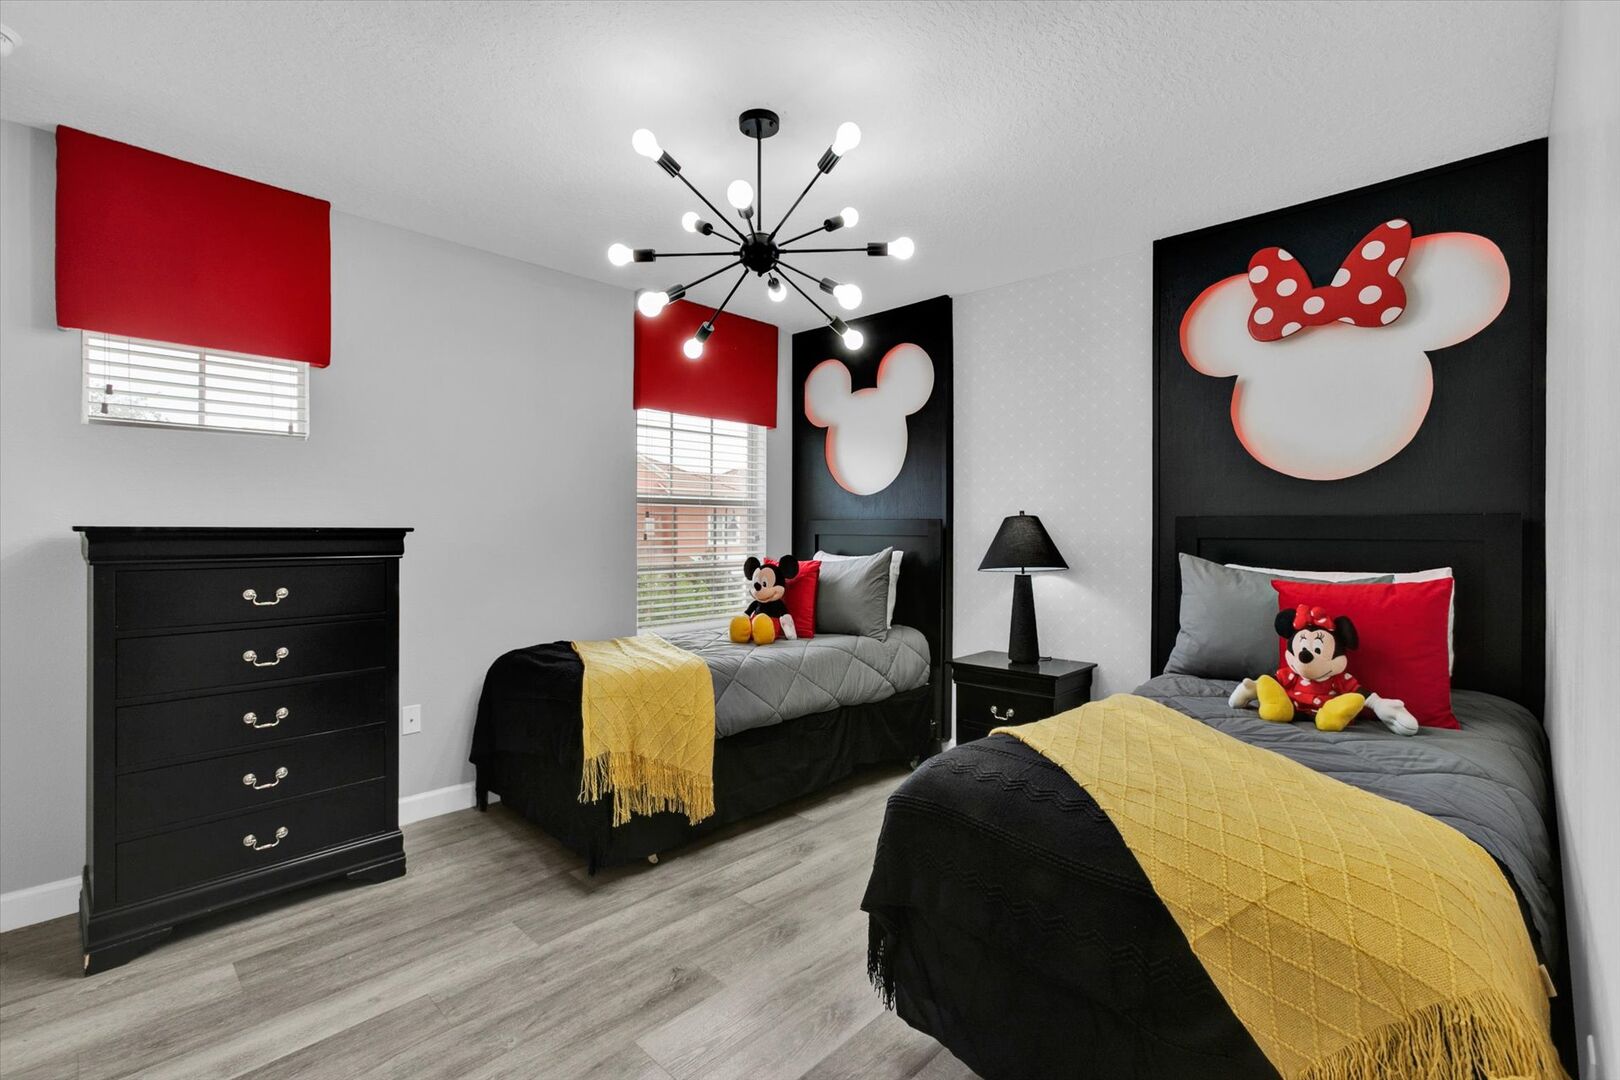 Two Twins Bedroom 5 Upstairs
Mickey Theme